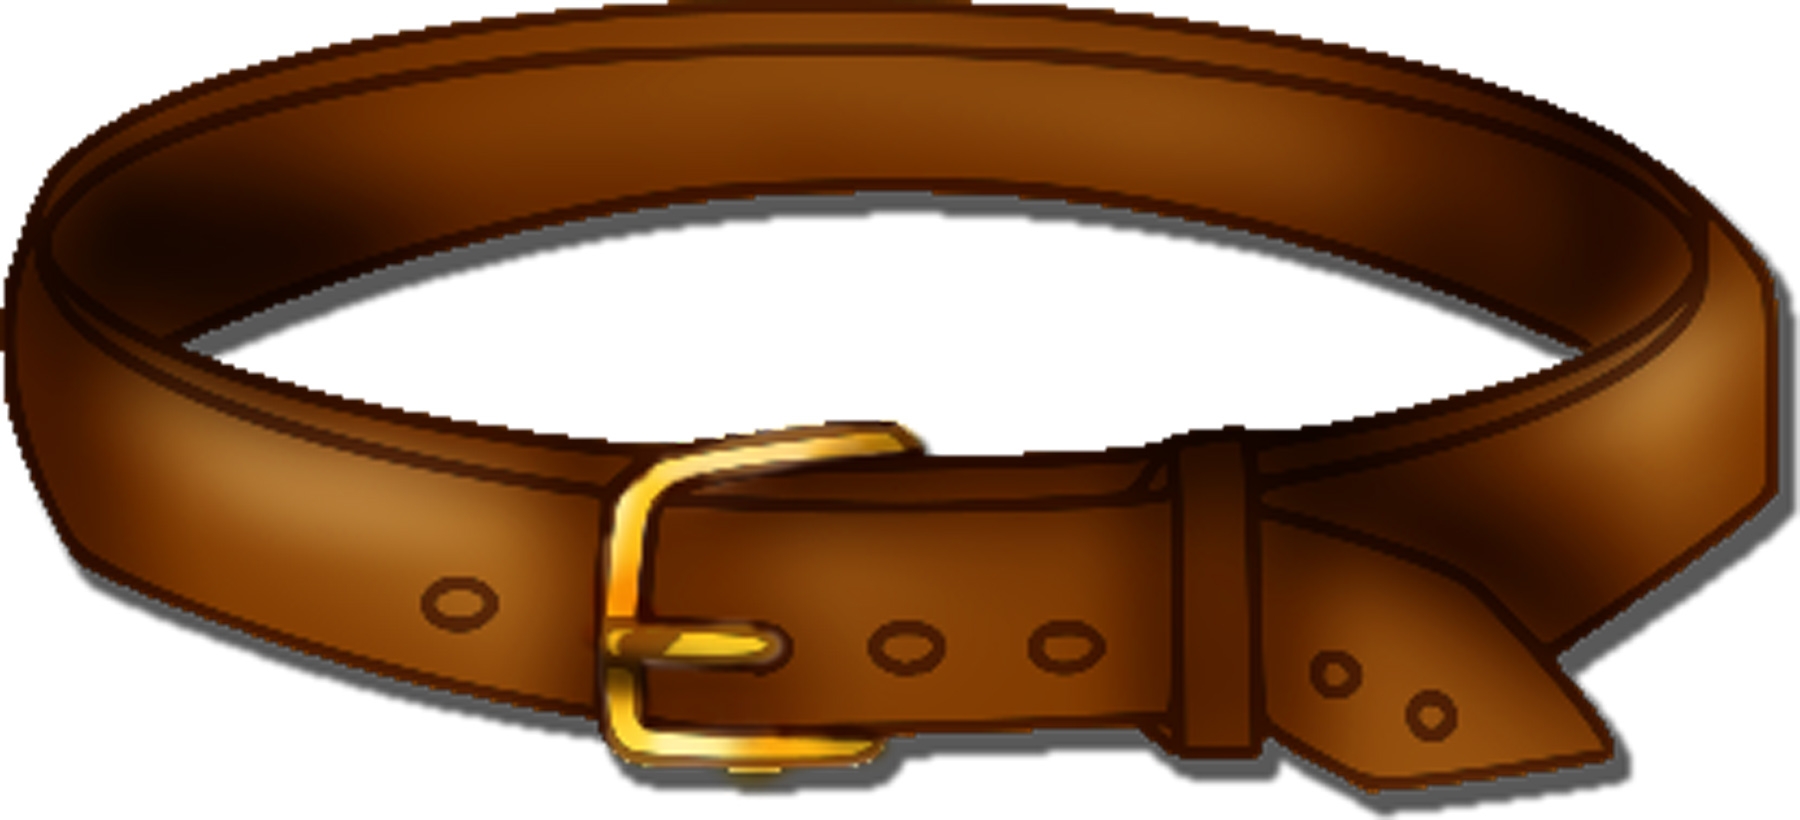 Narrow belt with buckle icon,